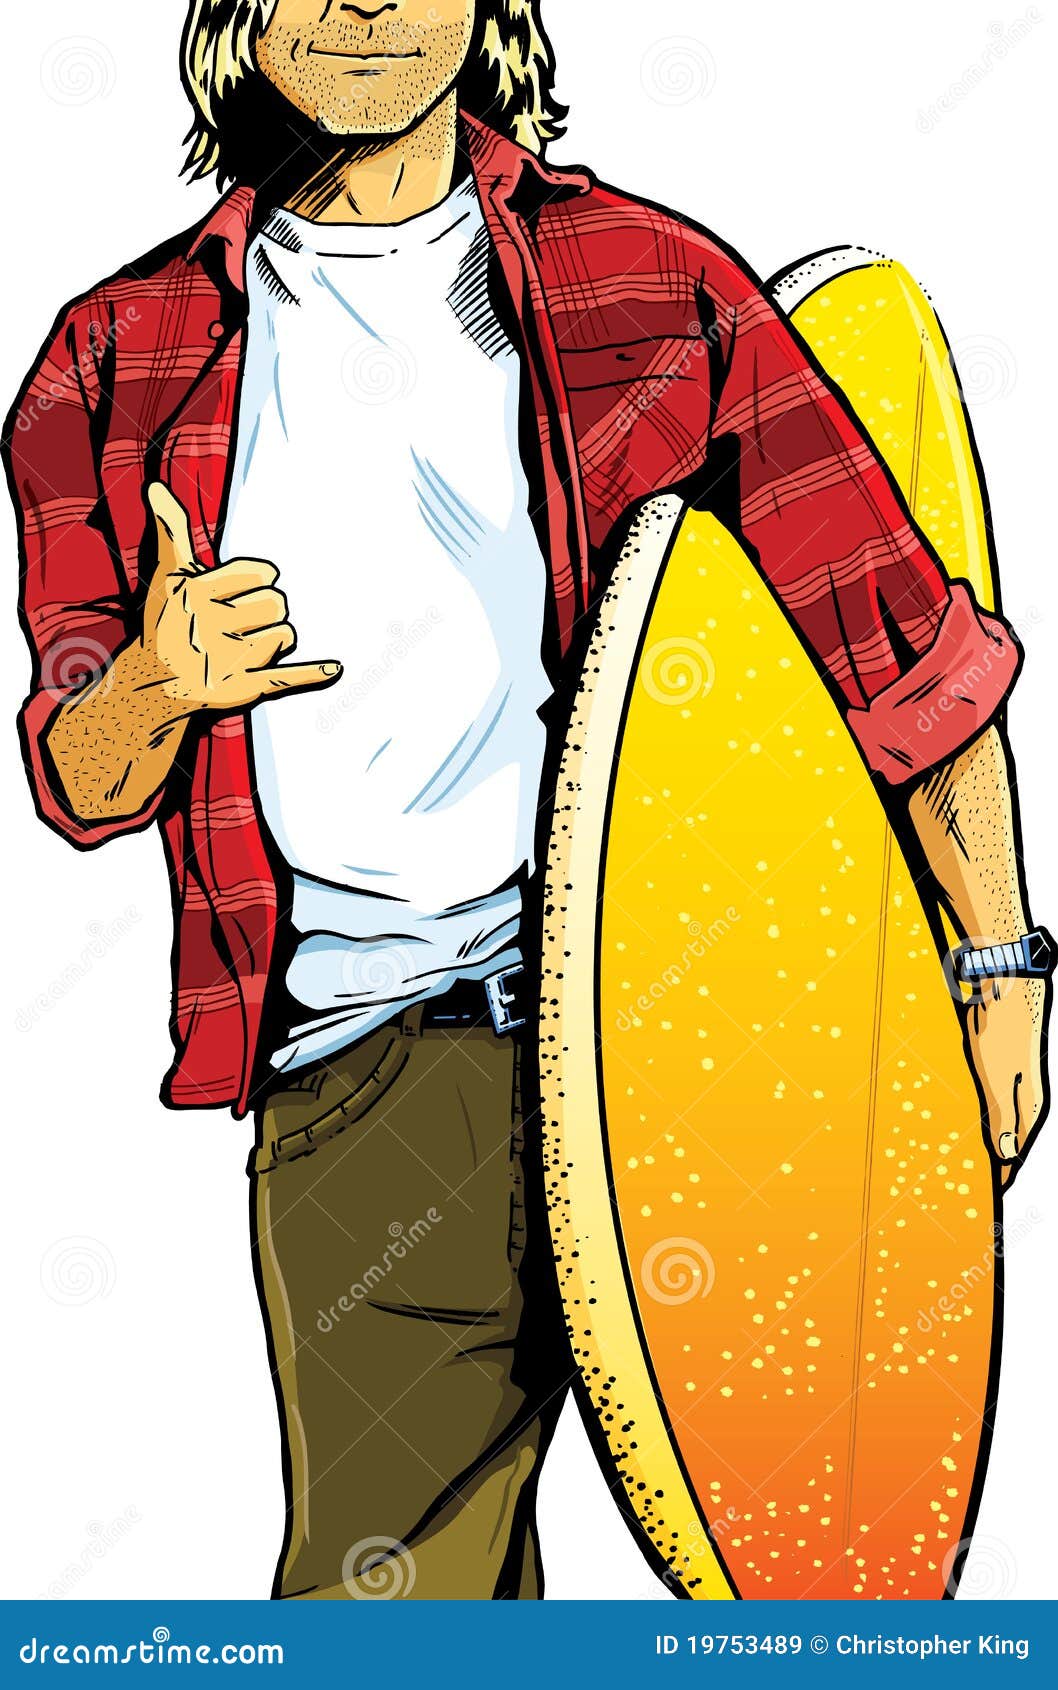 male surfer dude carrying a surfboard